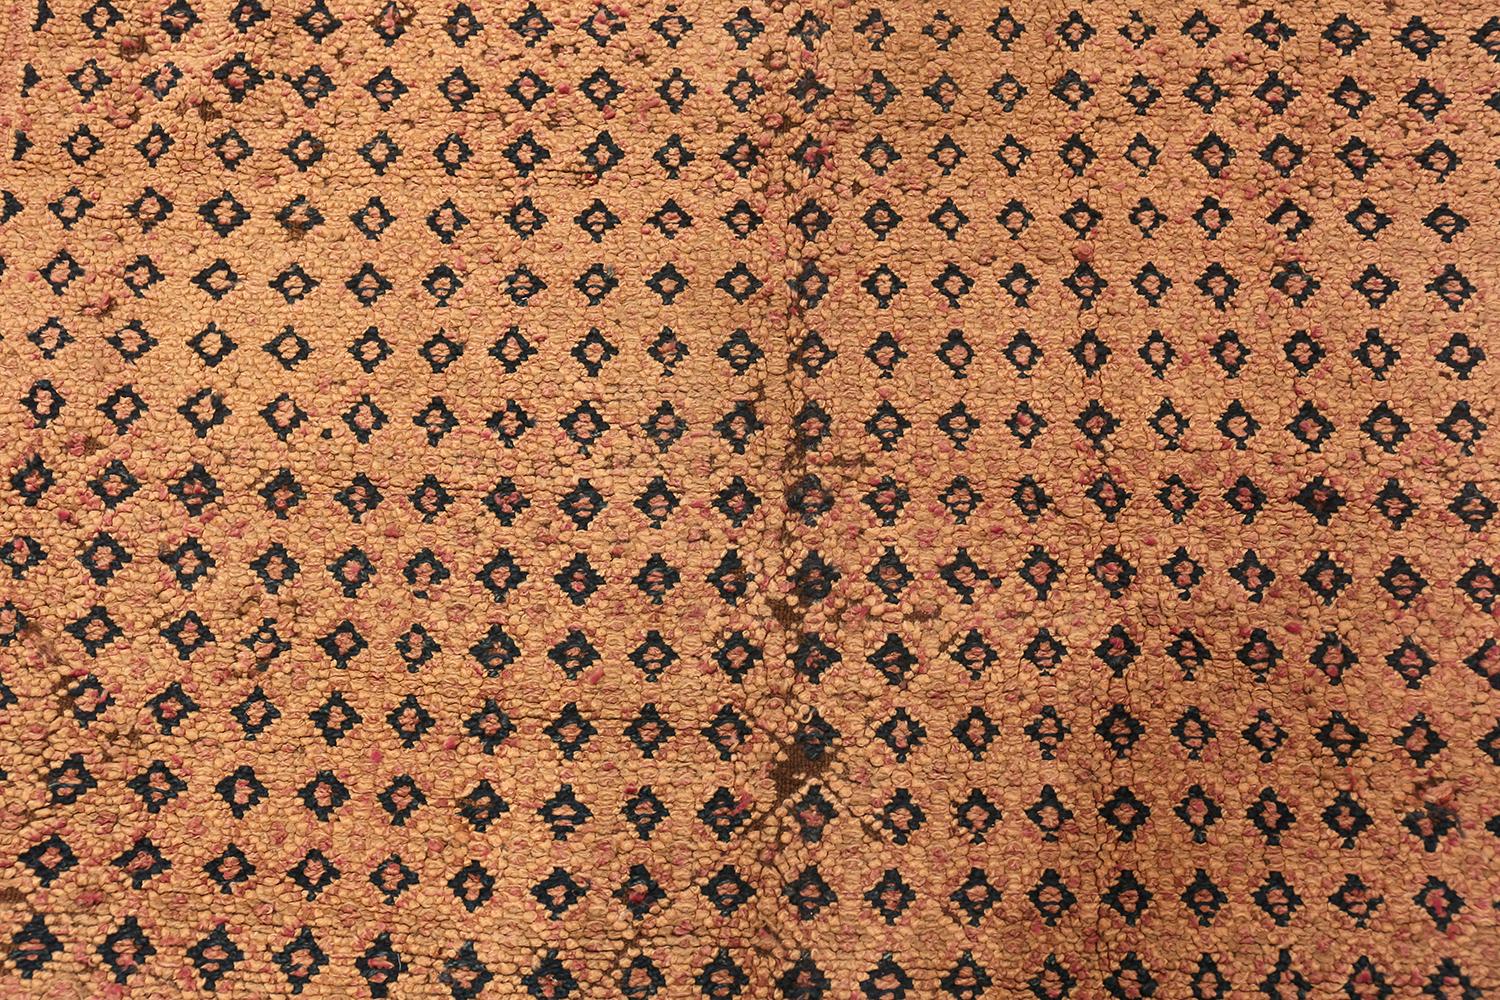 Vintage Brown Geometric Moroccan Rug. 5 ft 9 in x 10 ft In Good Condition For Sale In New York, NY